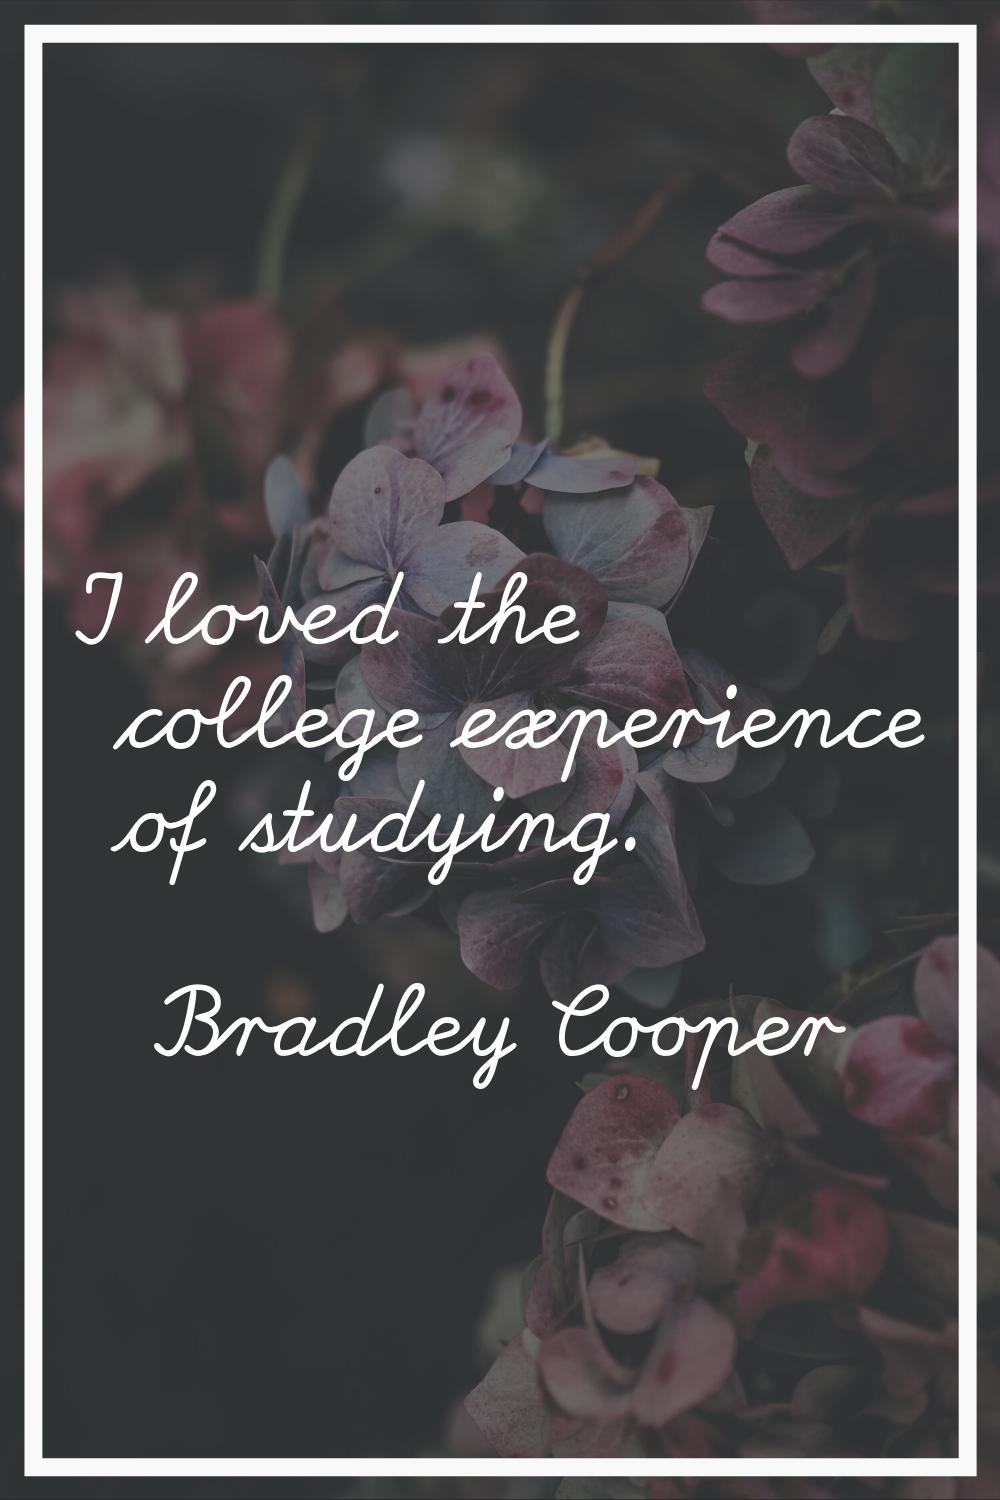 I loved the college experience of studying.